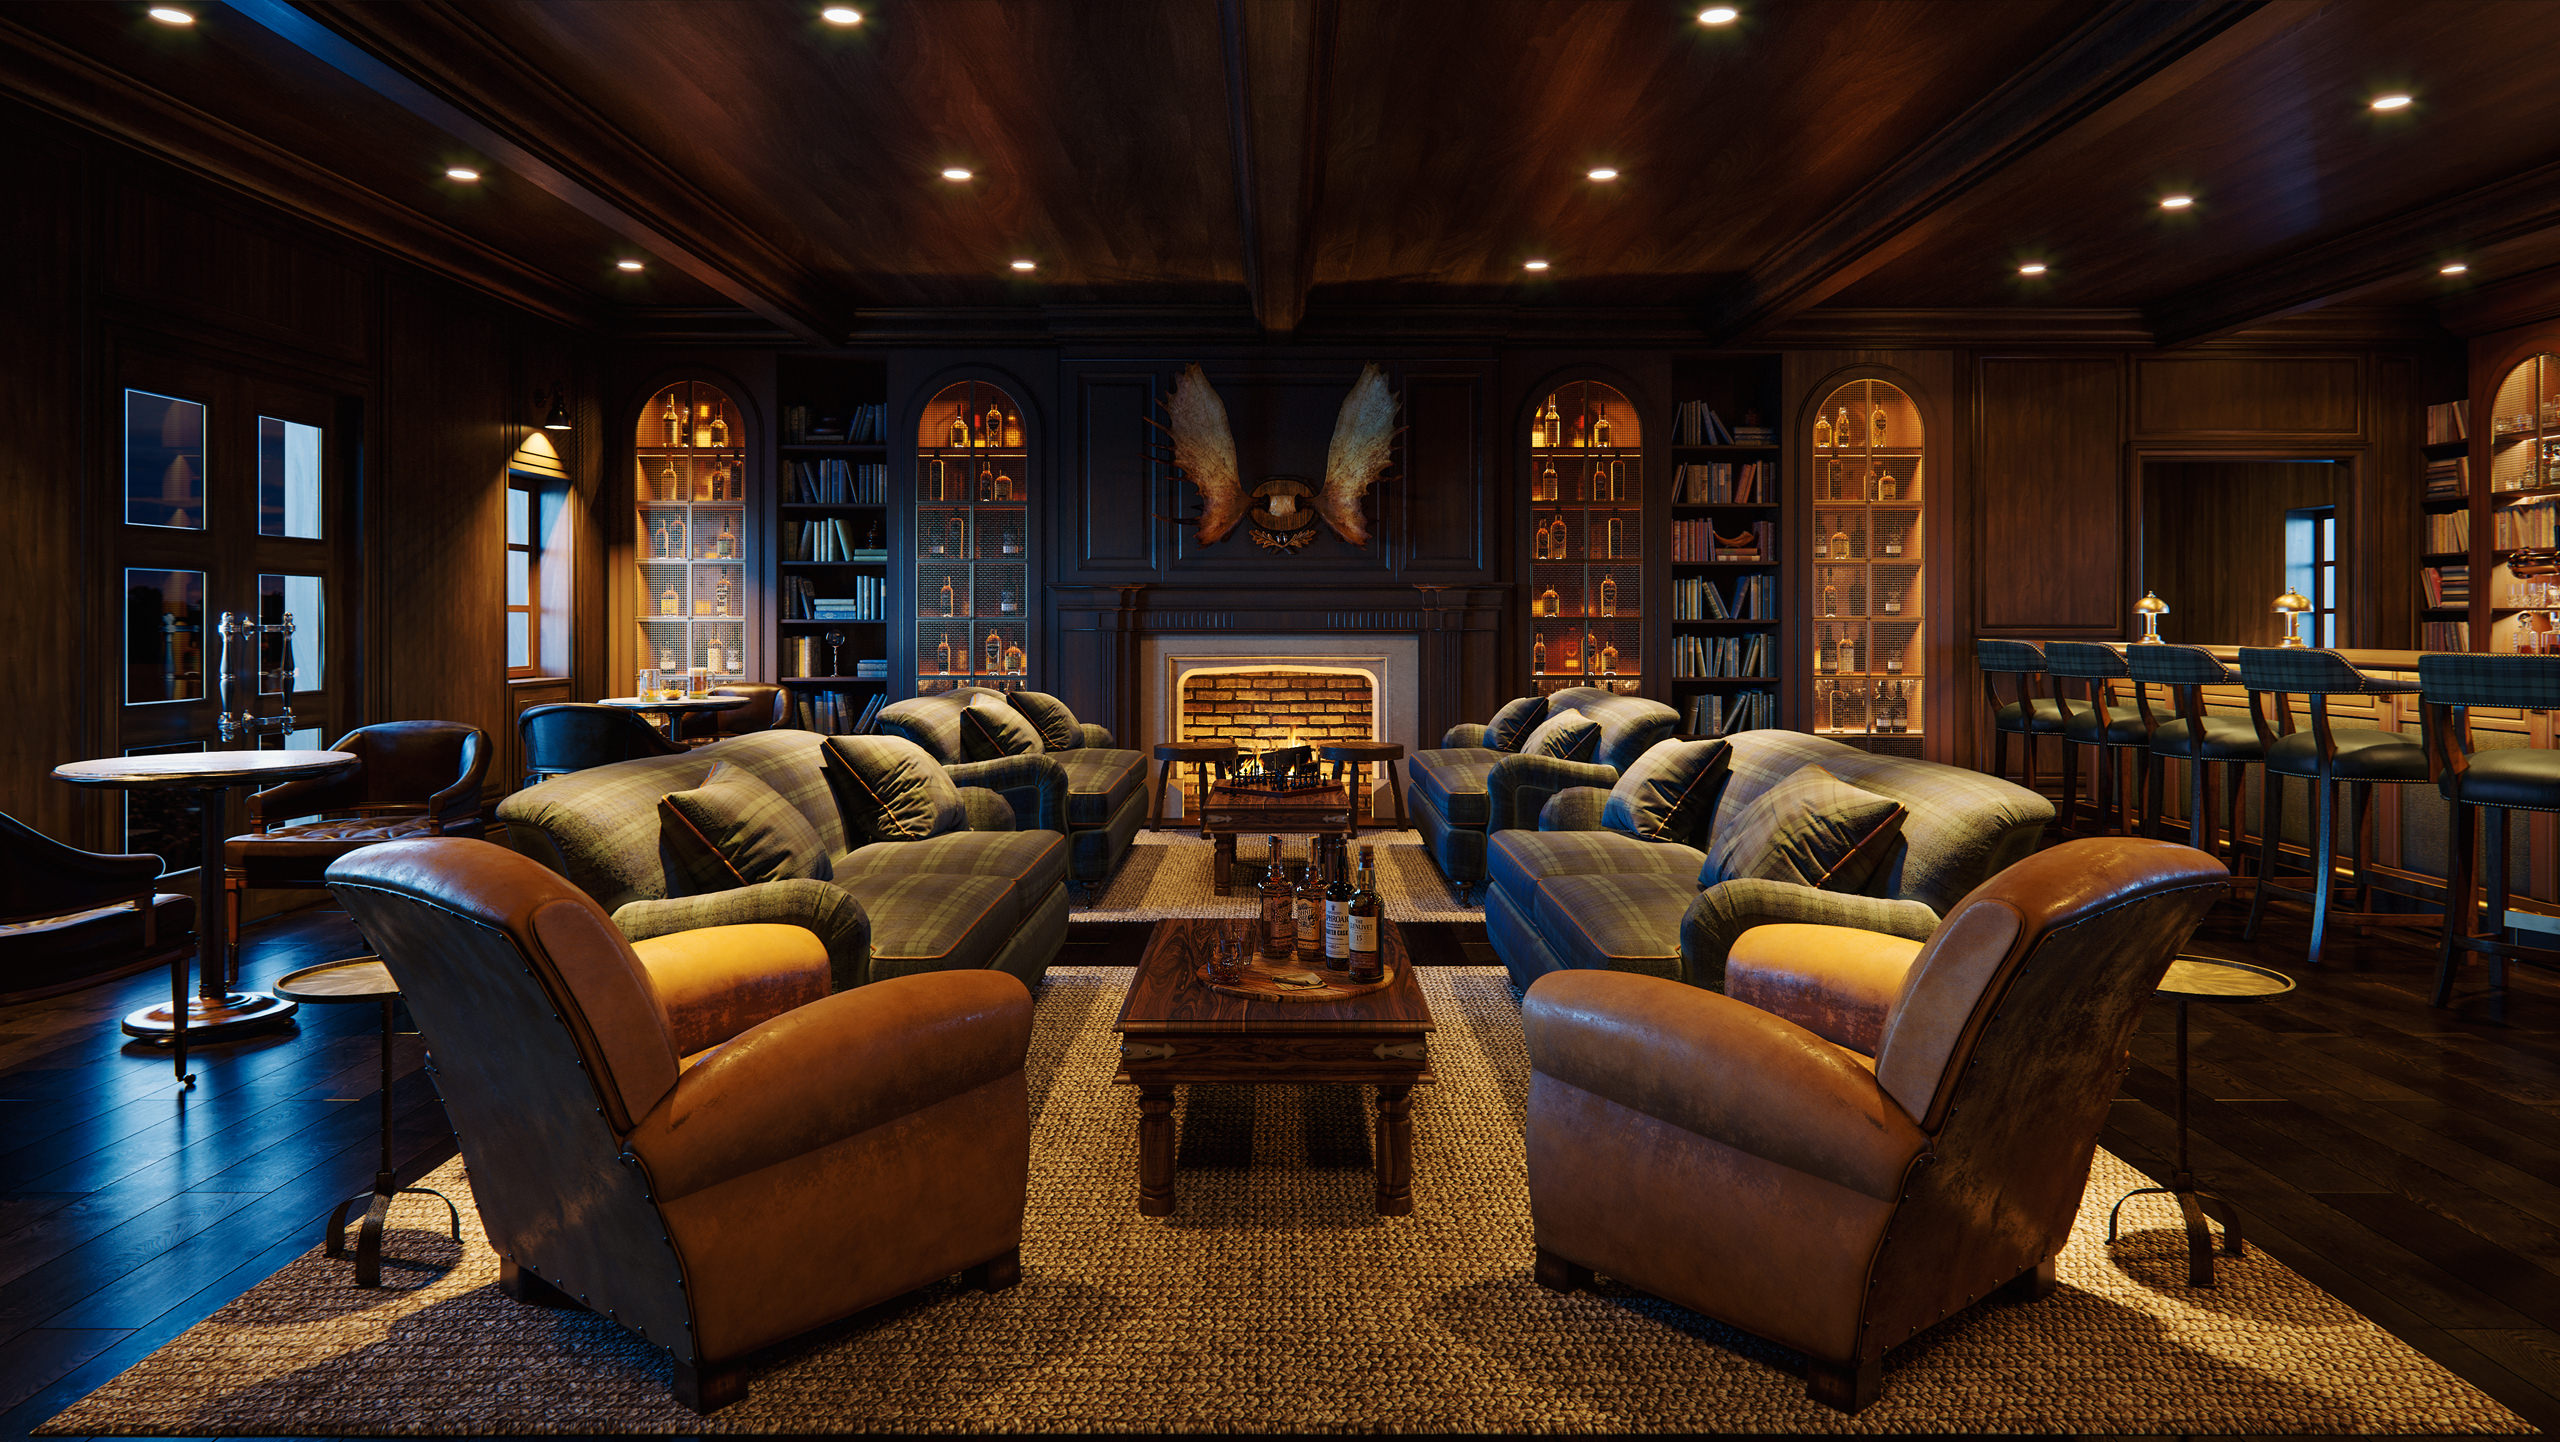 Interior 3D rendering of lounge area furnished with leather armchairs and tartan couches displaying a fireplace in the back of the room with whiskey library on both sides